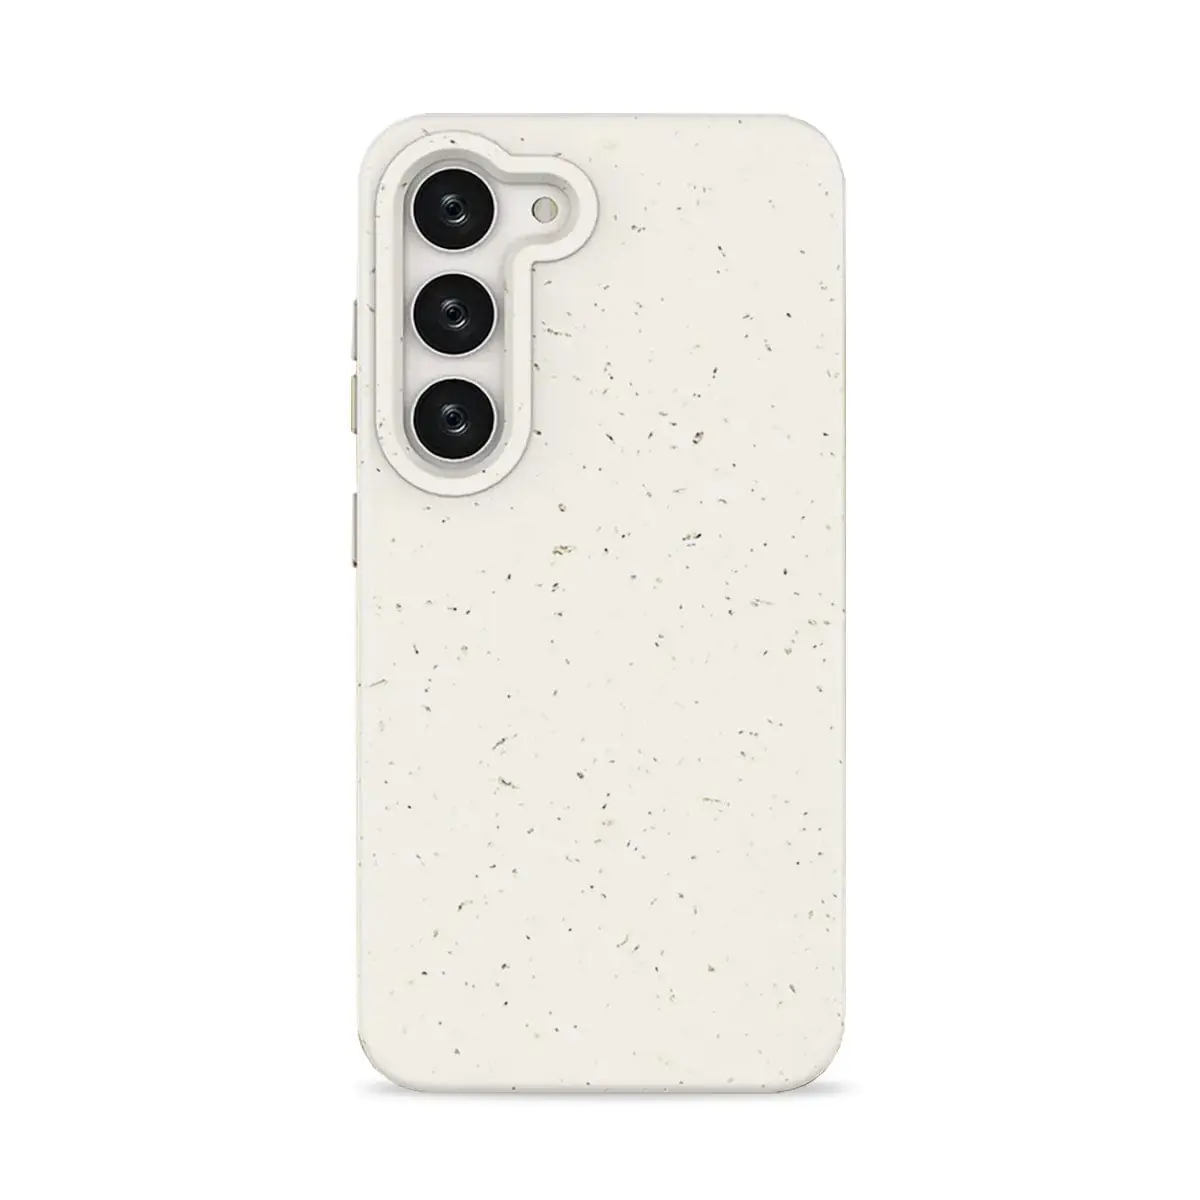 Samsung Galaxy S23 Ultra Plant-based Compostable Shockproof Case - White